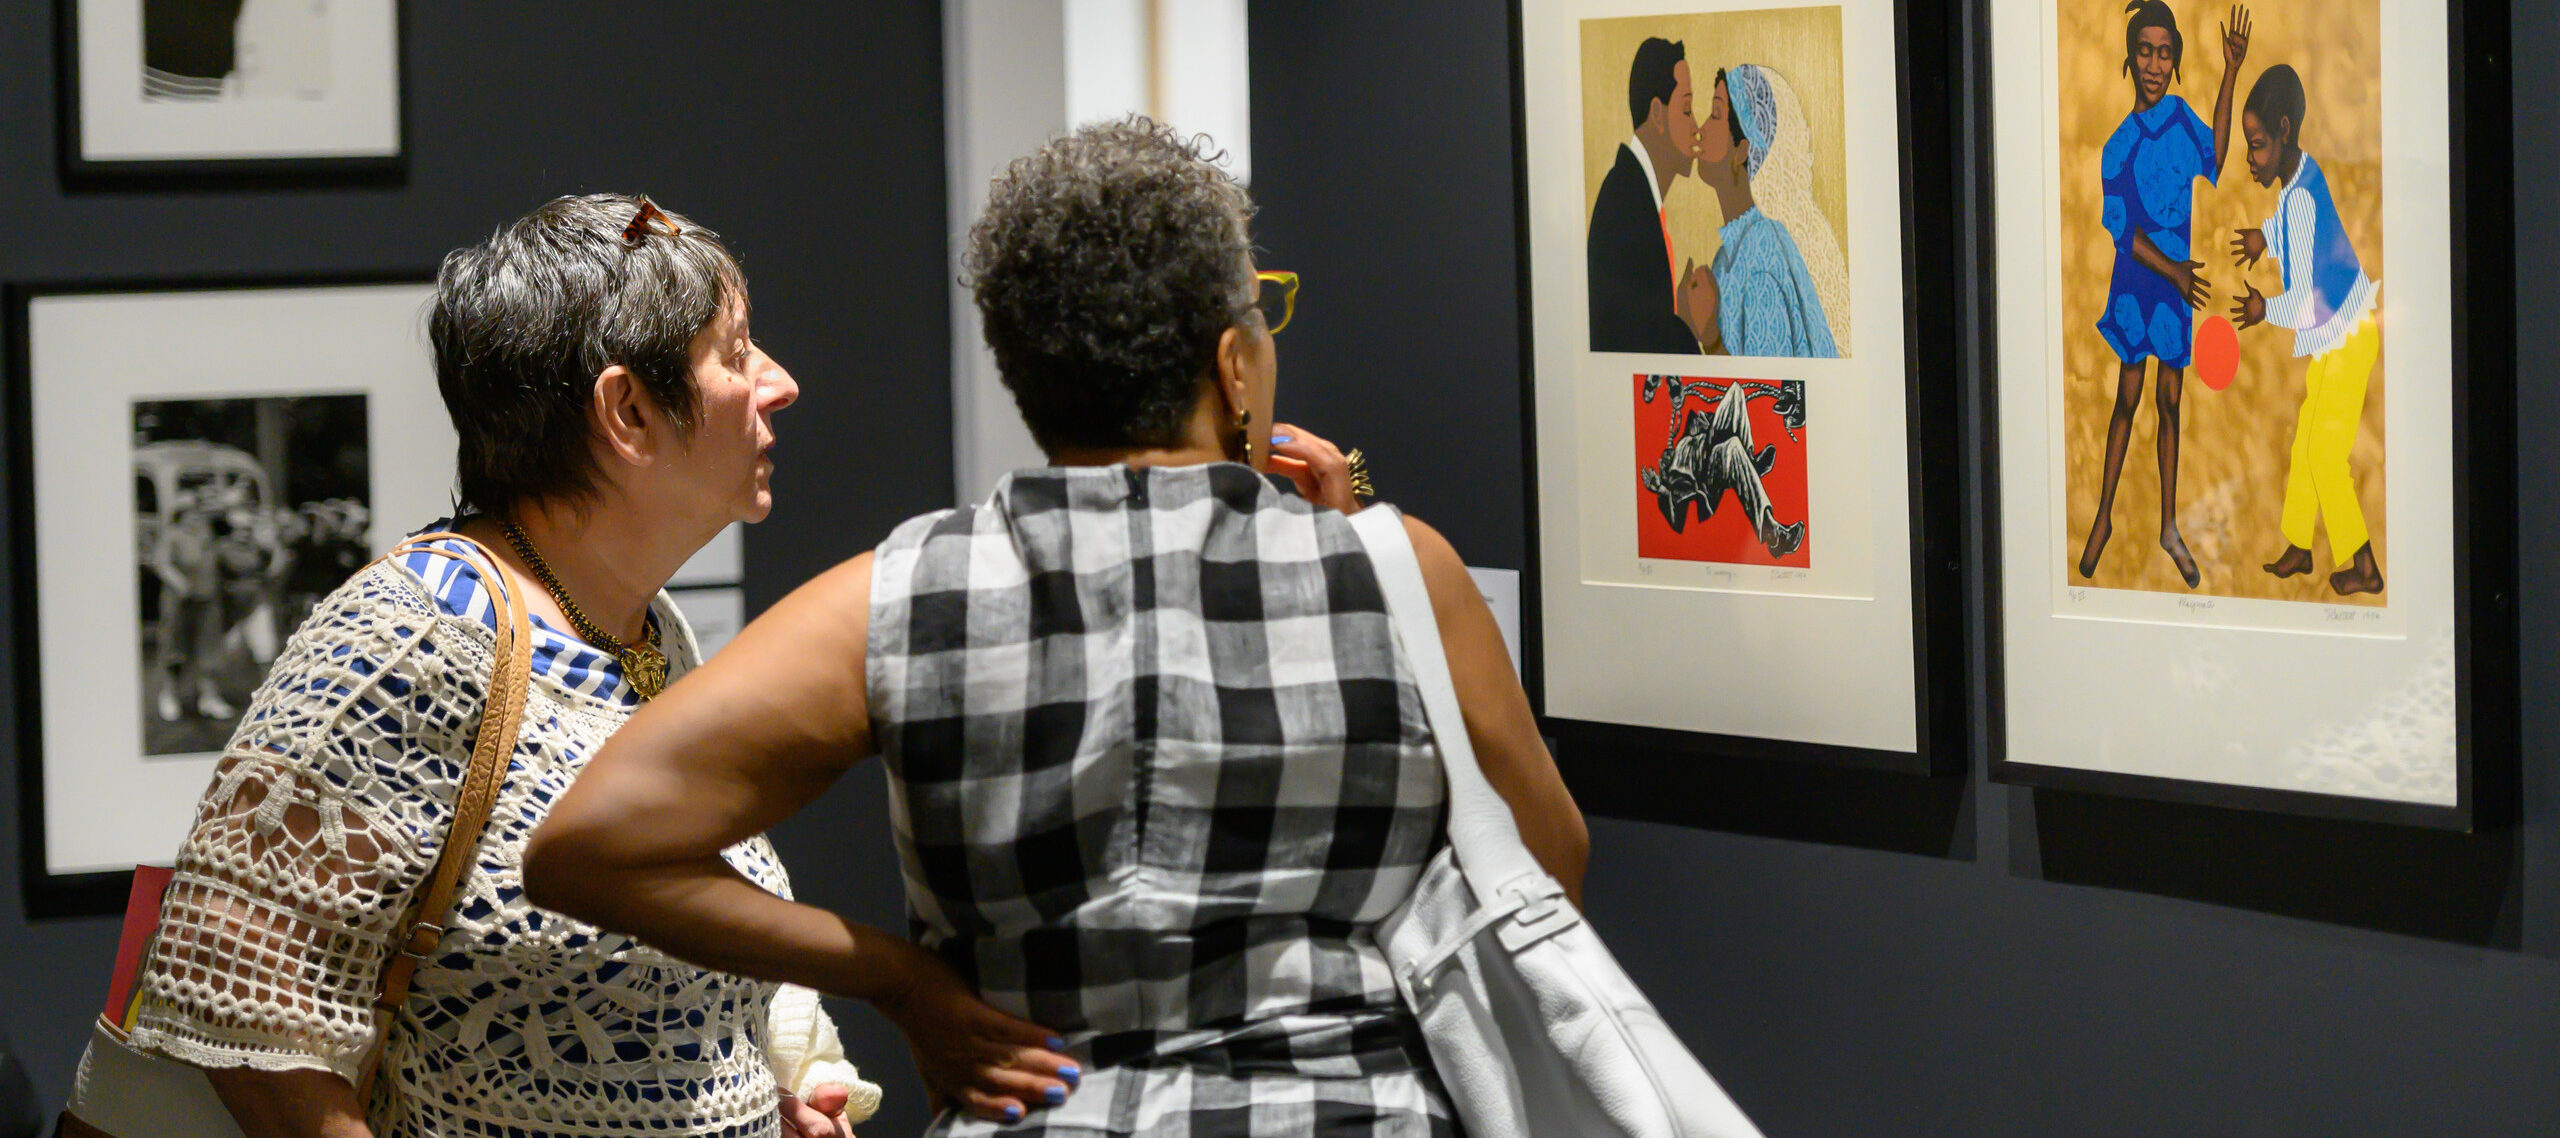 Two older women, one light-skinned with gray hair and one medium-dark skinned with short dark hair, stand next to one another deep in conversation about a series of prints by Elizabeth Catlett.